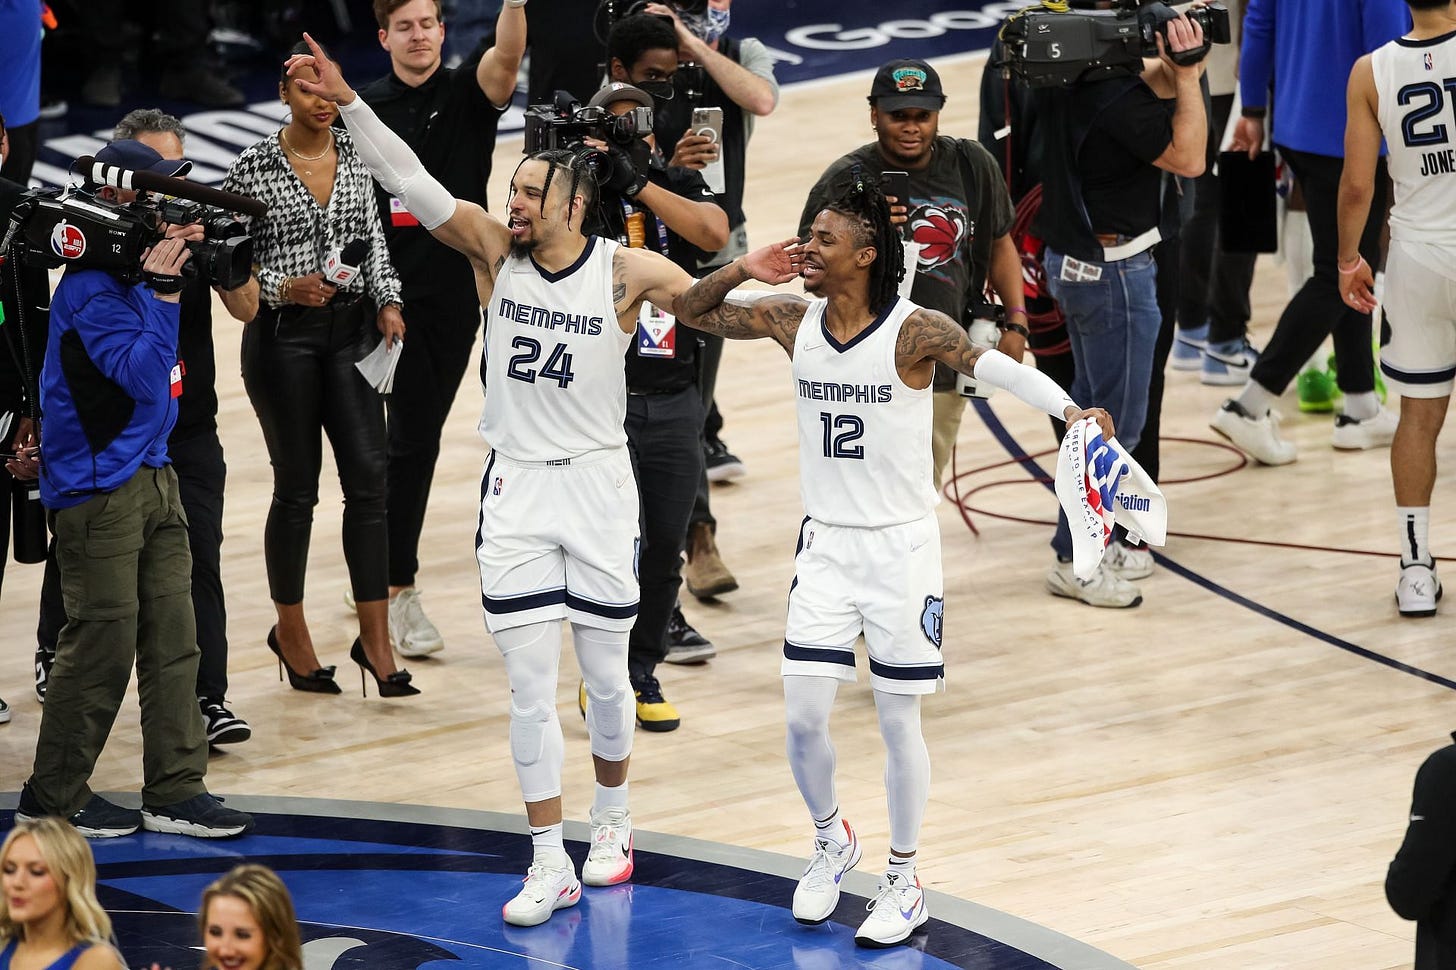 Watch: Ja Morant hilariously hits the "Griddy" on the Minnesota  Timberwolves on-court logo after closing the playoff series 4-2 for Memphis  Grizzlies